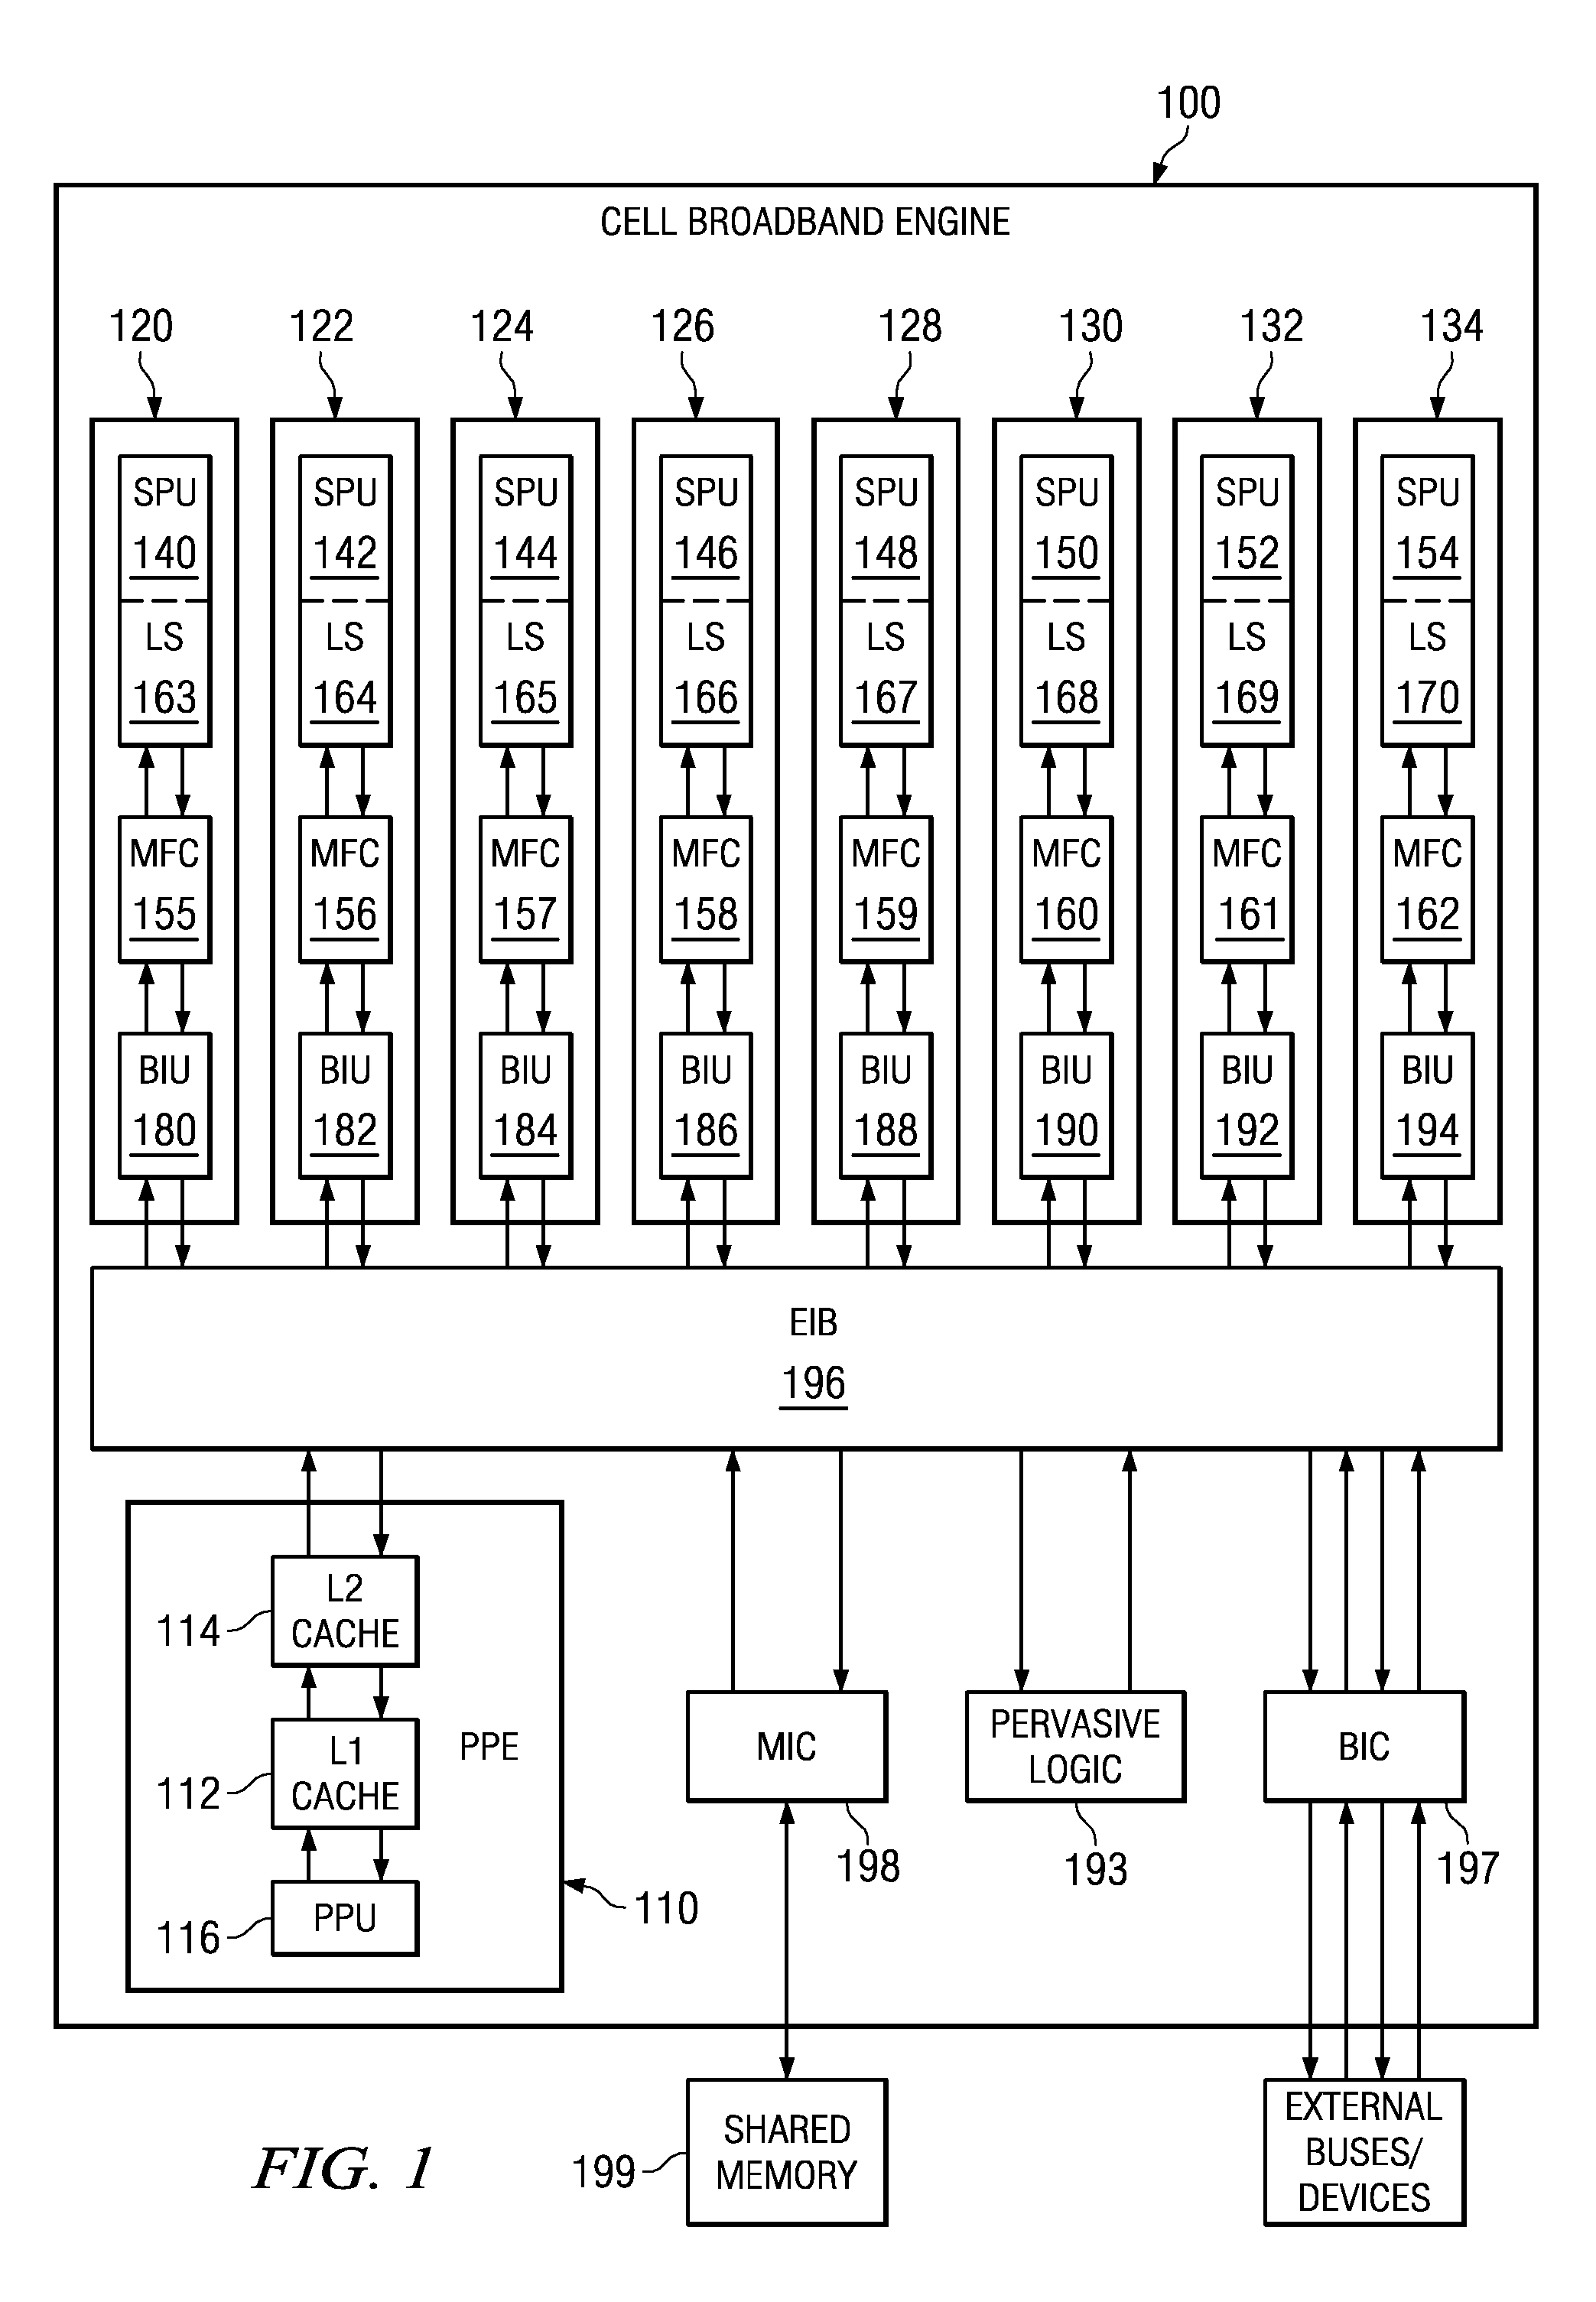 System and Method for Booting a Multiprocessor Device Based on Selection of Encryption Keys to be Provided to Processors